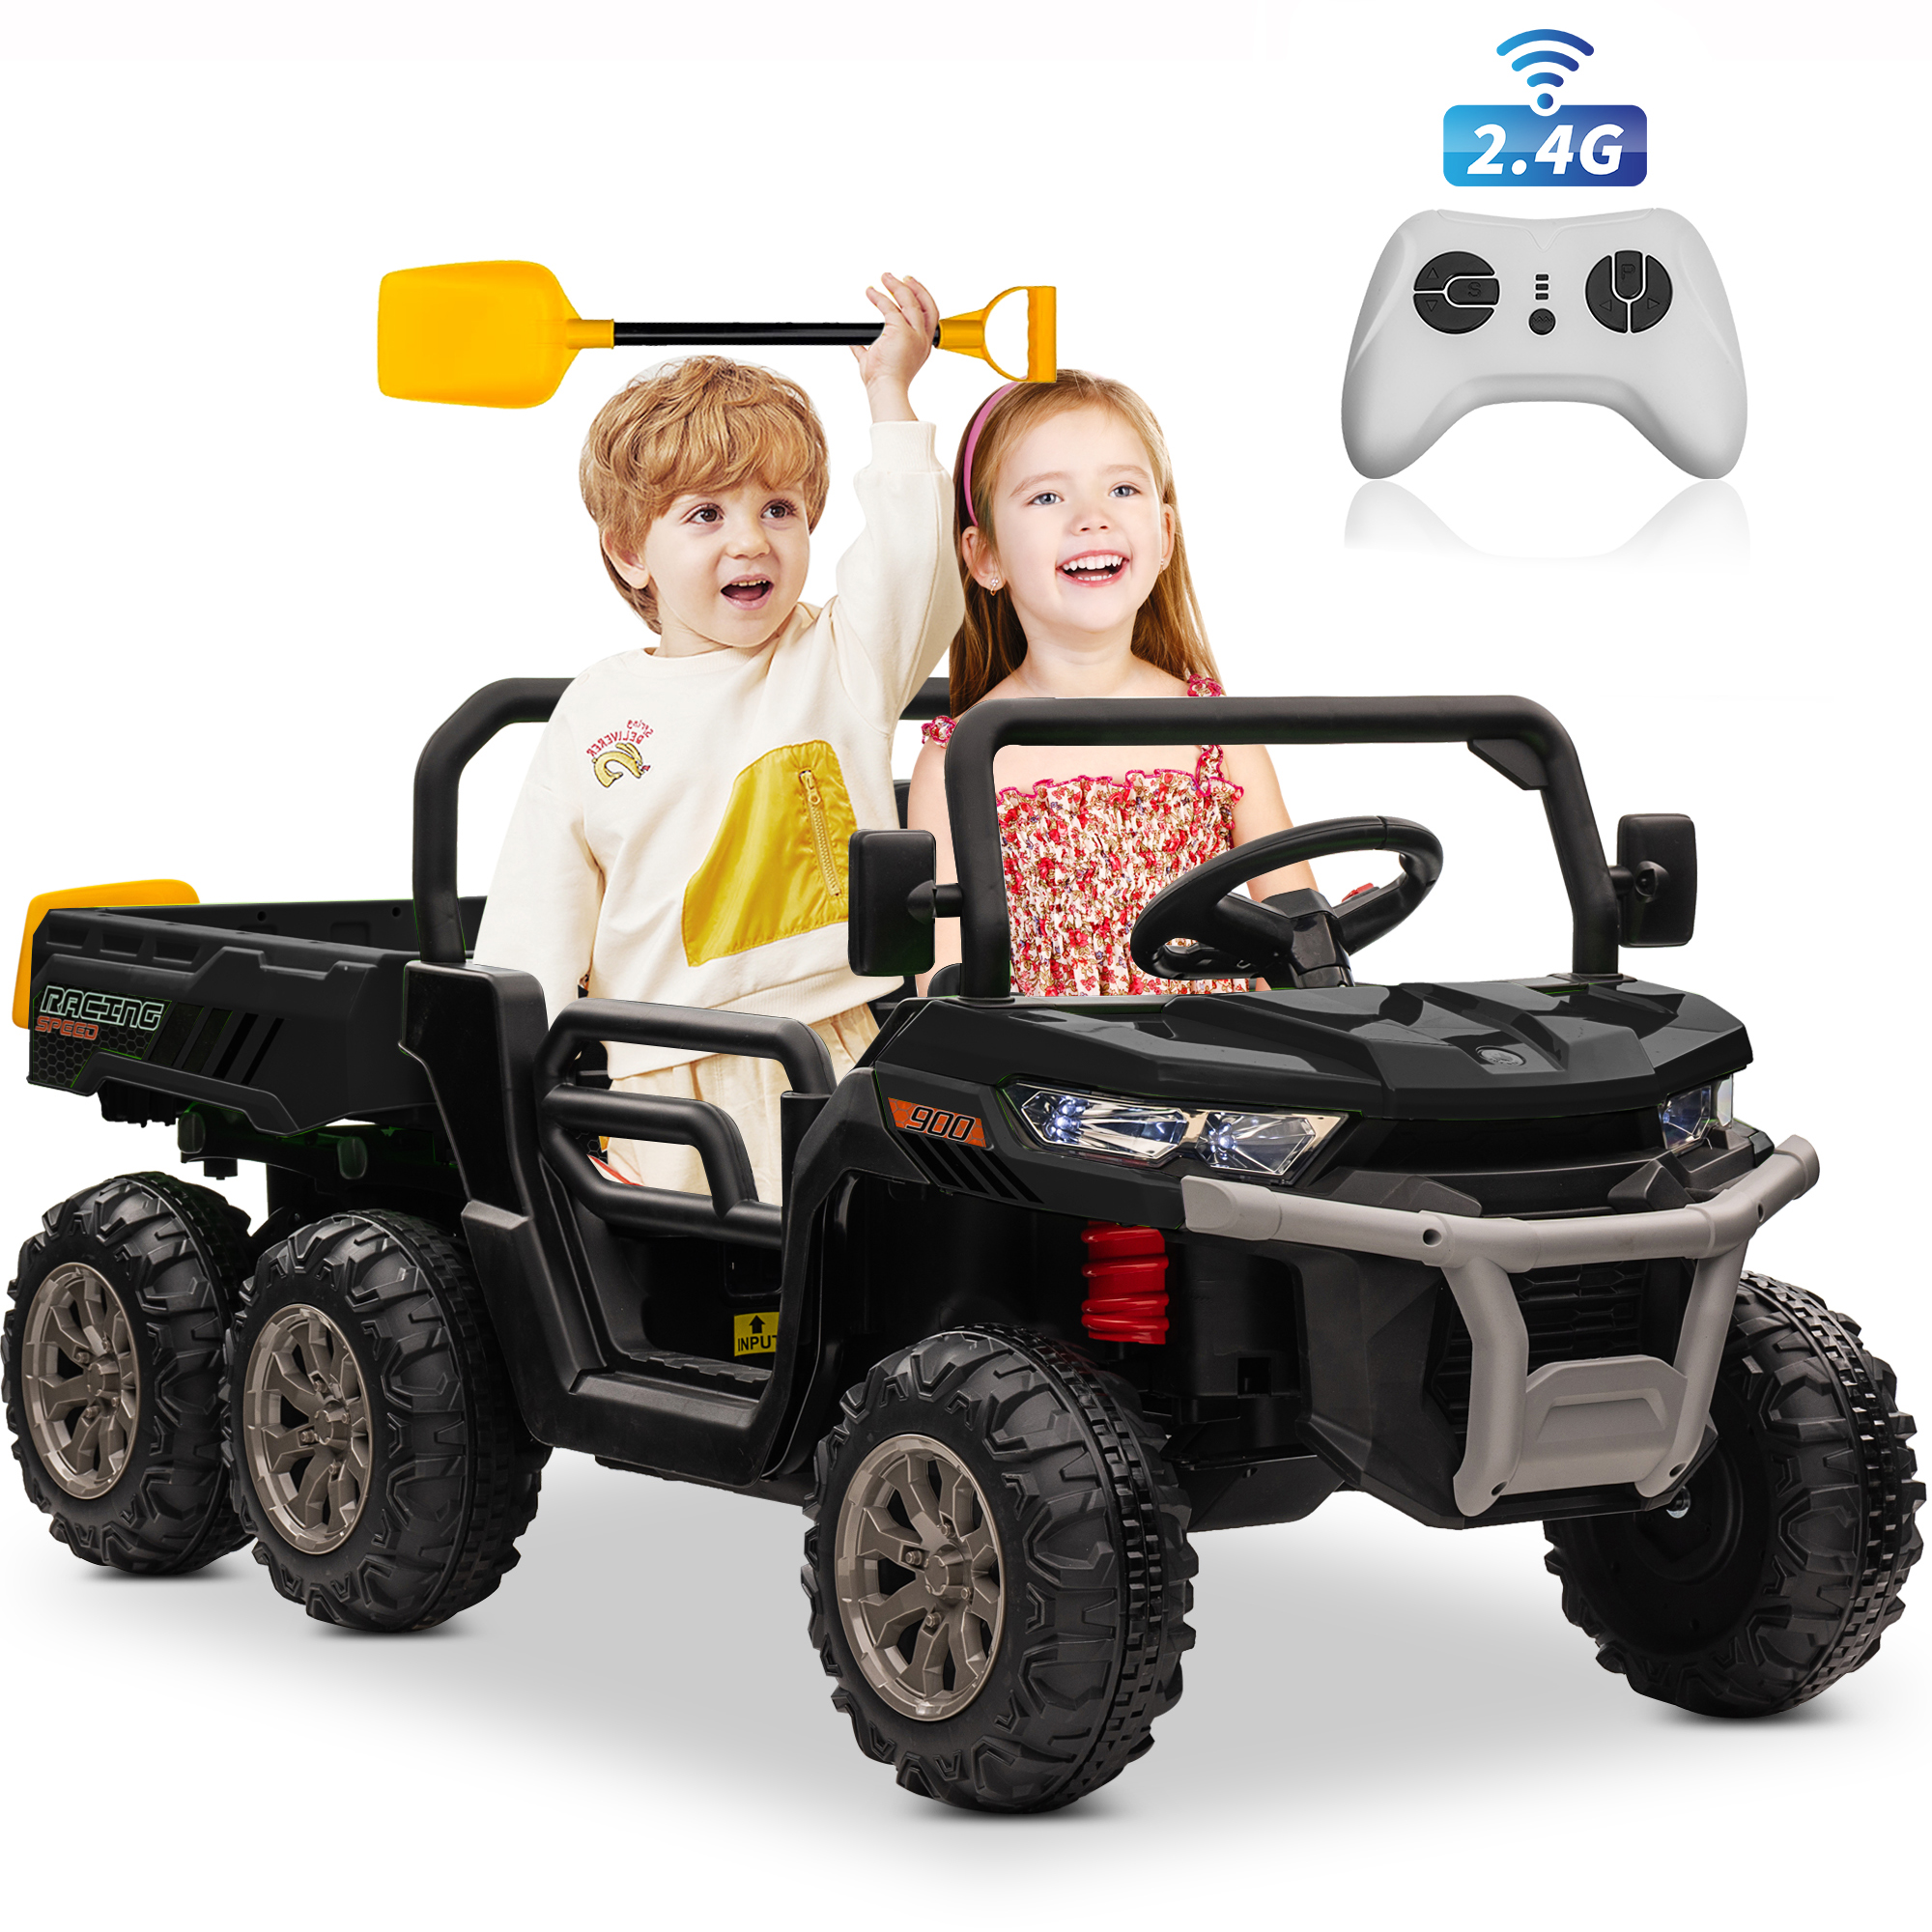 Joyracer 24 Volt Ride on Tractor with Remote Control, 4WD Motor 7AH Battery Powered Ride on Toys, 6-Wheel Big Car w/ Tipping Bucket Trailer, 3 Speeds,LED Lights, MP3/USB Music for Big Kids, Black - image 1 of 10